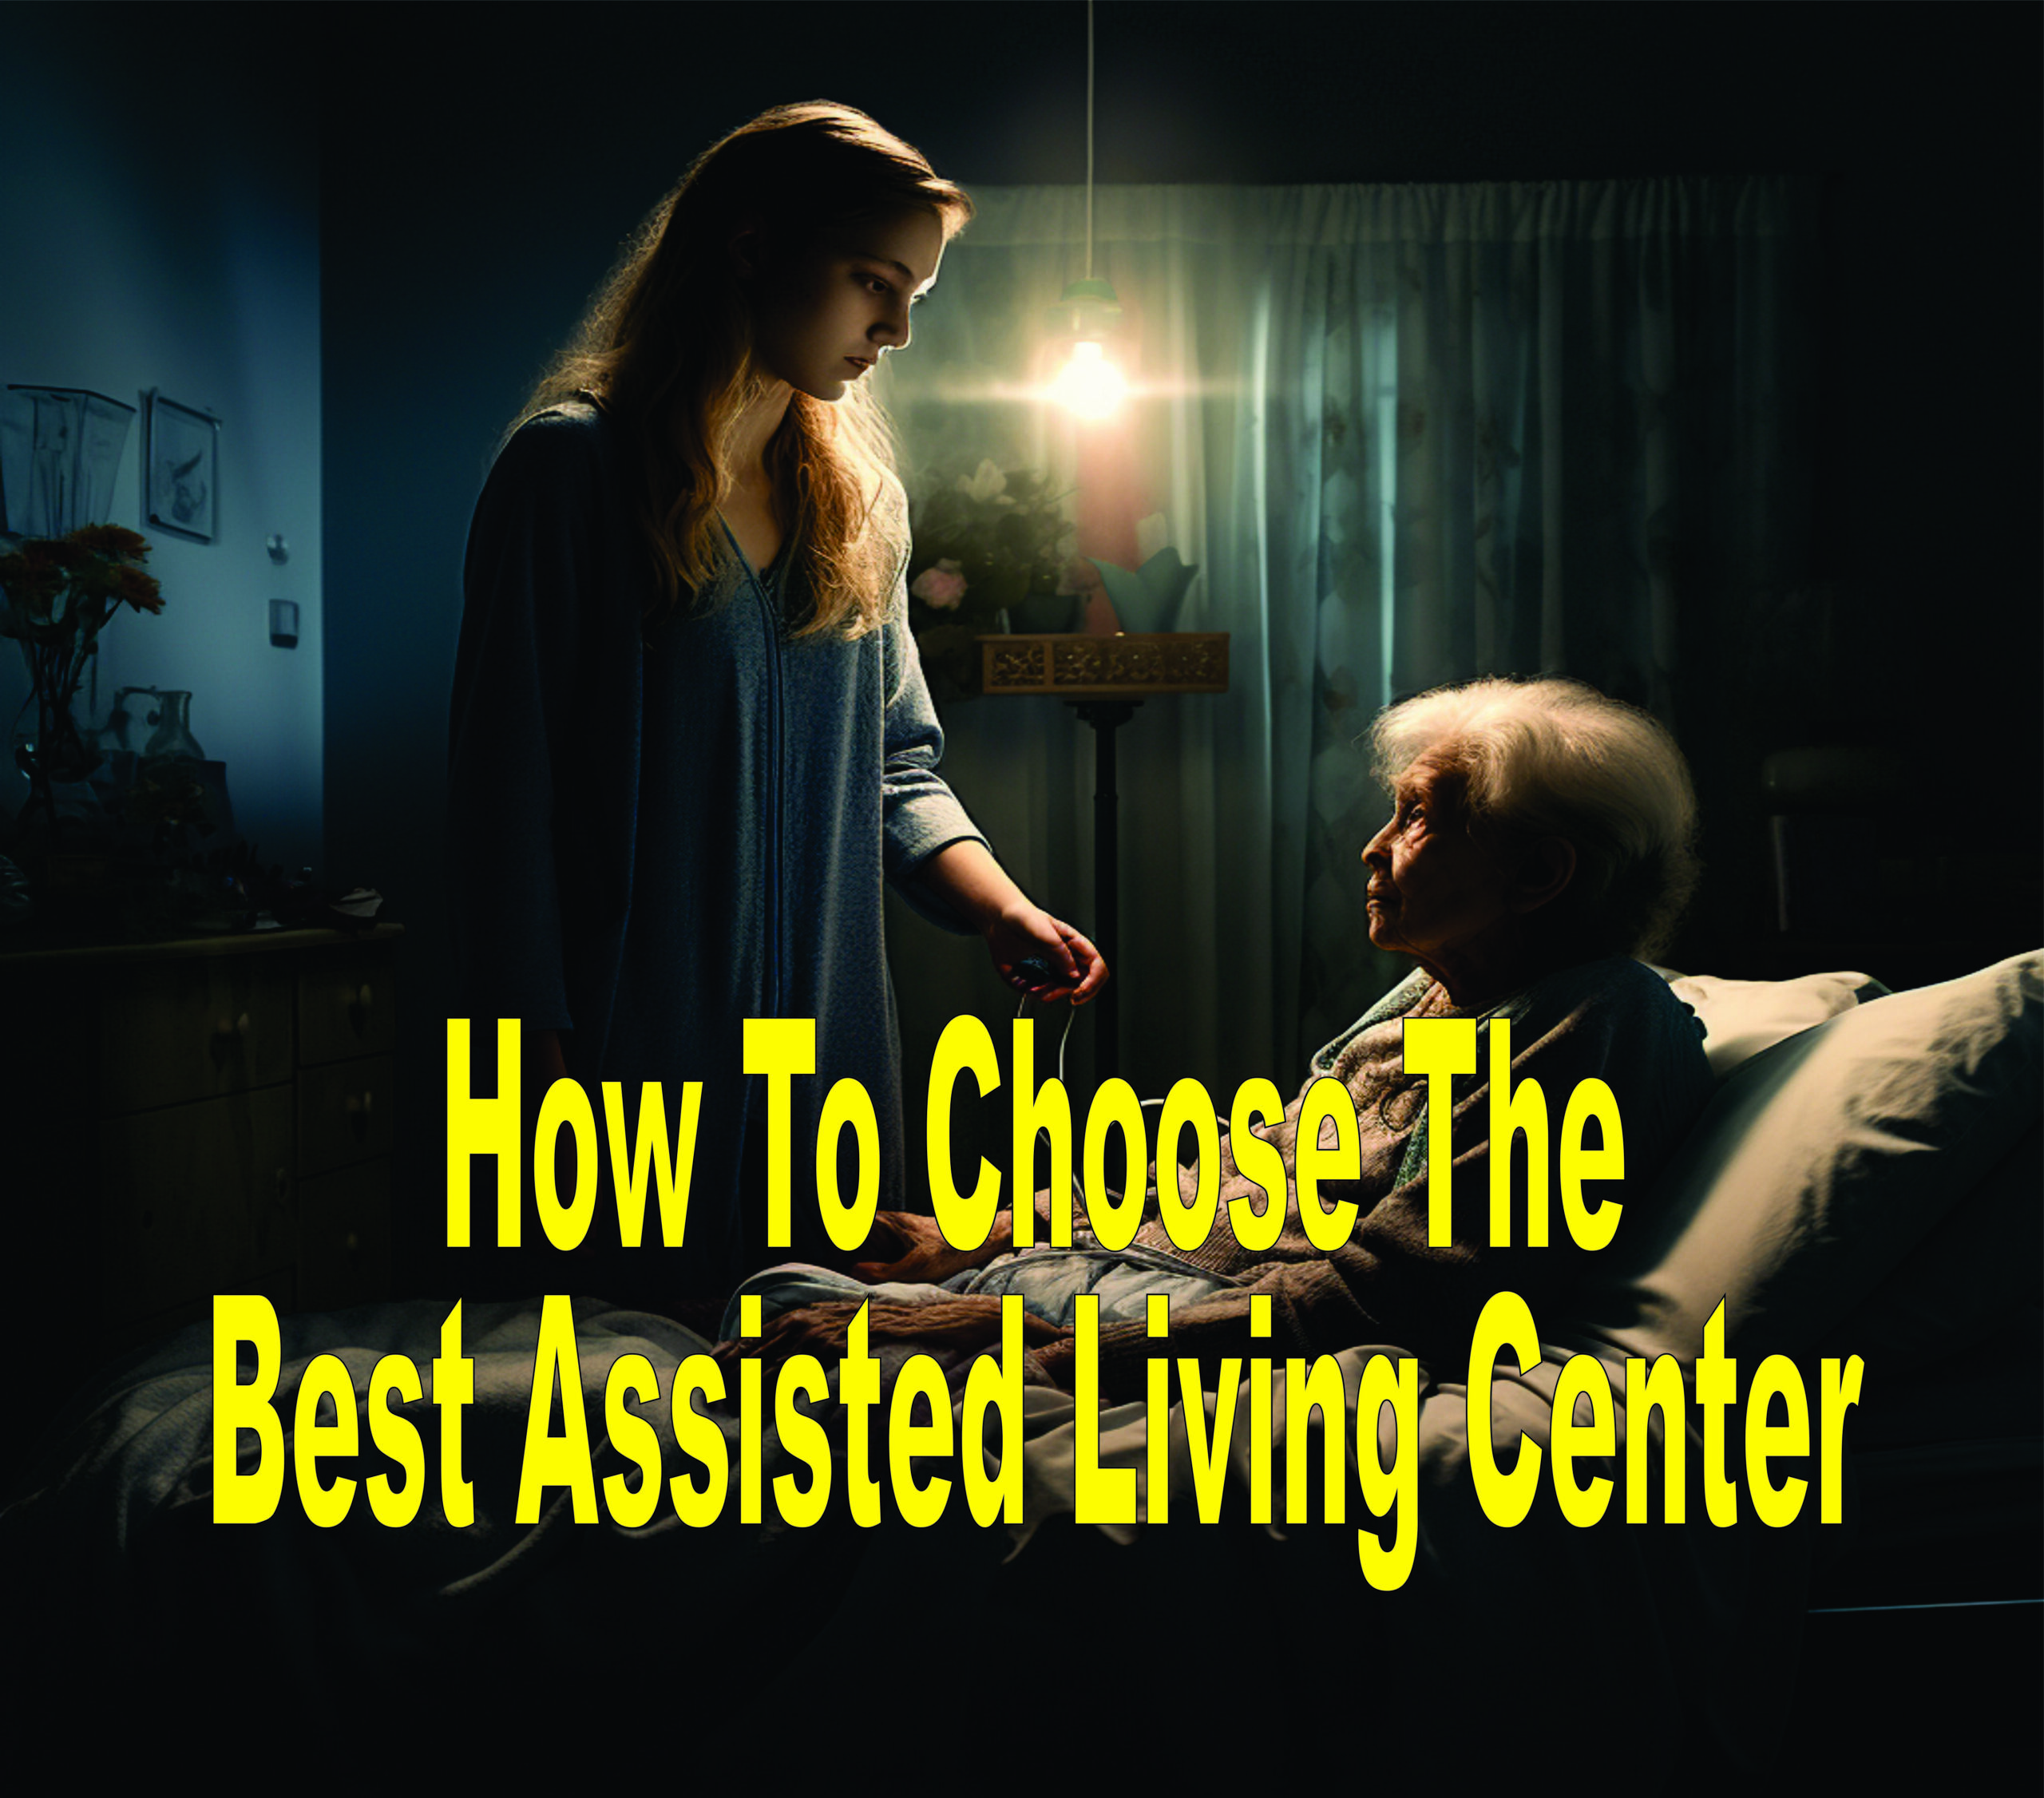 How To Choose The Best Assisted Living Center